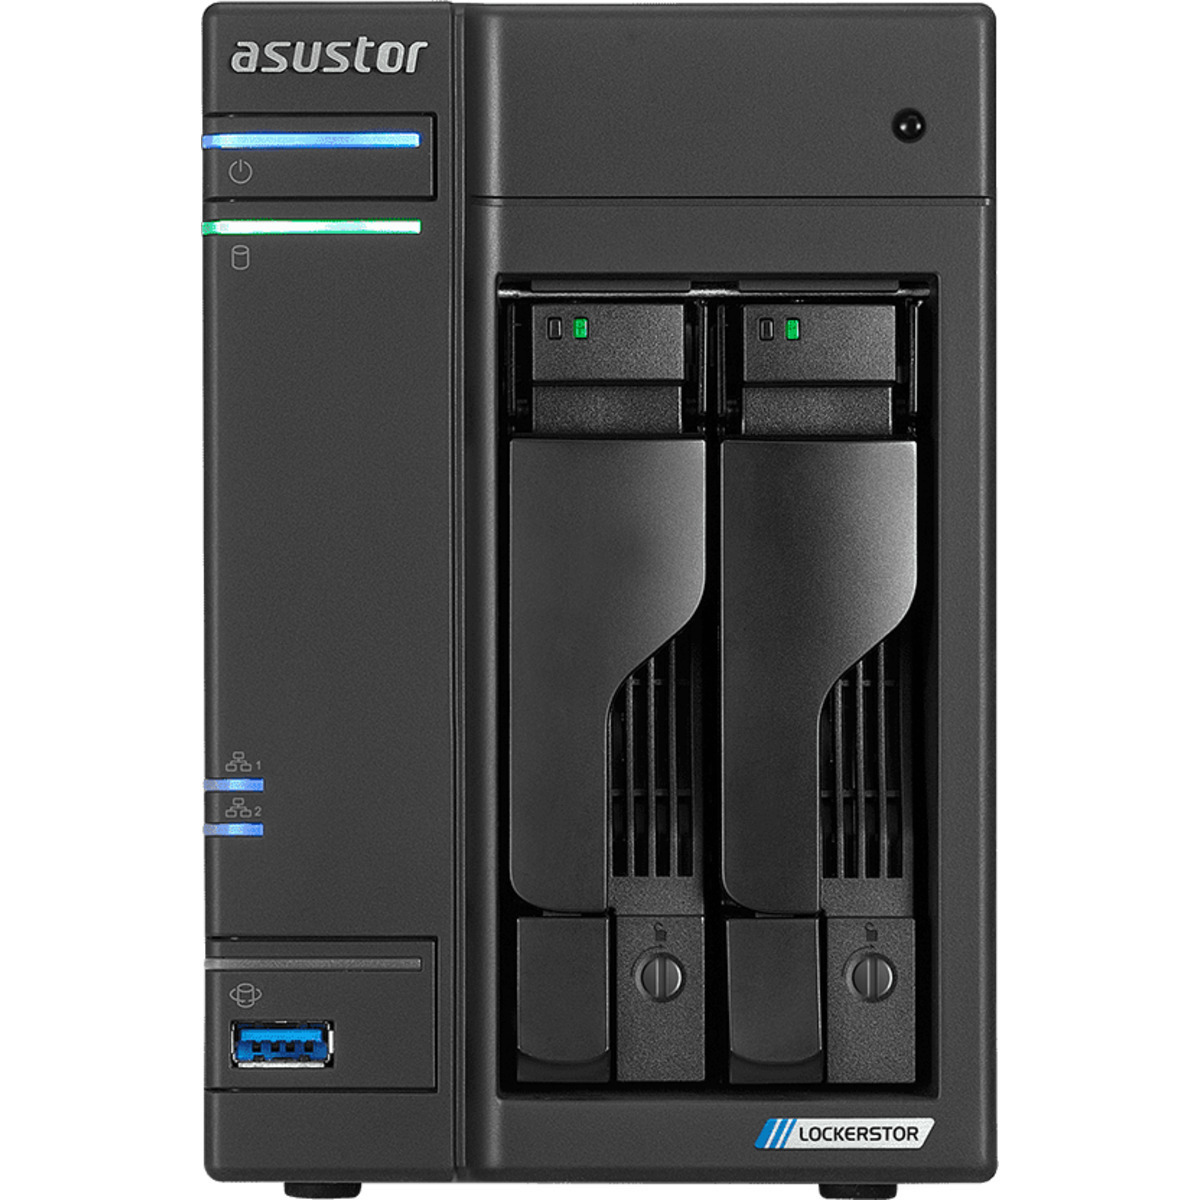 buy $1043 ASUSTOR AS6602T Lockerstor 2 12tb Desktop NAS - Network Attached Storage Device 2x6000gb Seagate EXOS ST6000NM002A 3.5 7200rpm SATA 6Gb/s HDD ENTERPRISE Class Drives Installed - Burn-In Tested - FREE RAM UPGRADE - nas headquarters buy network attached storage server device das new raid-5 free shipping usa christmas new year holiday sale AS6602T Lockerstor 2